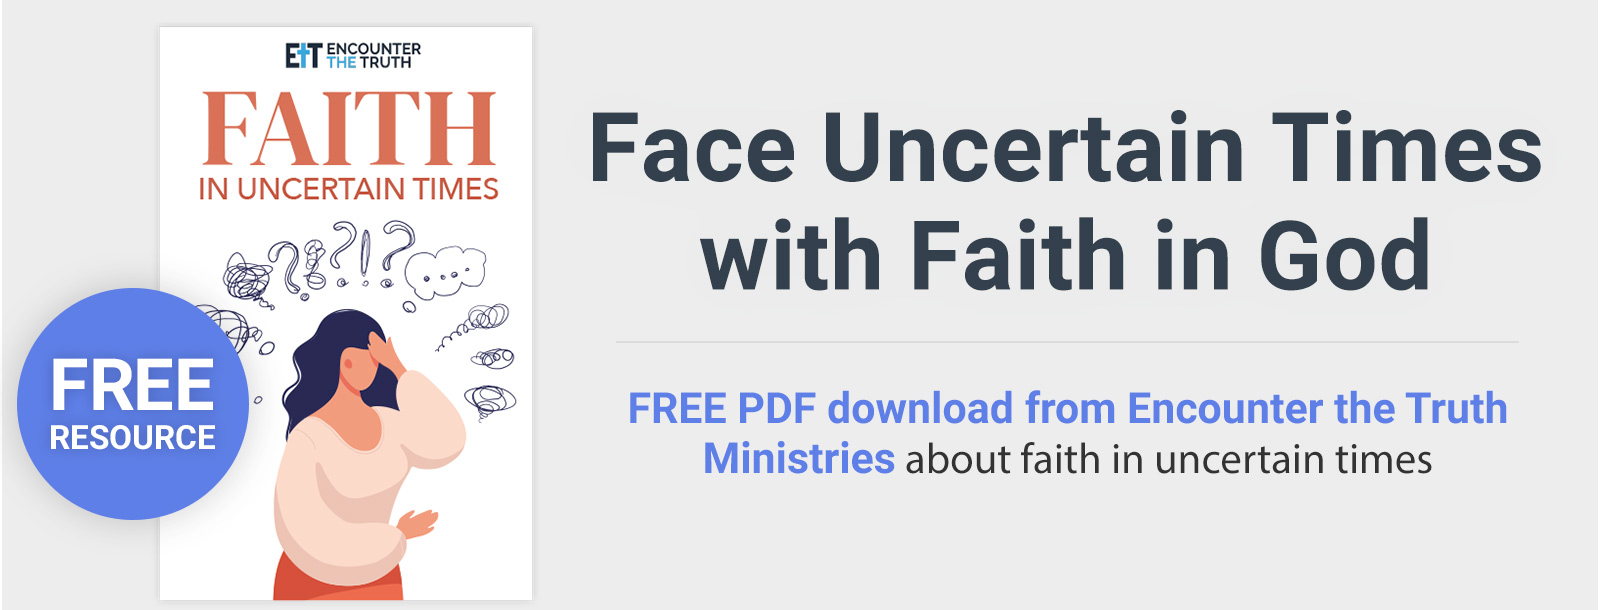 Free Resource - Face the Storms of Life with Confidence - Free PDF download from Encounter the Truth Ministries about finding your stability in God